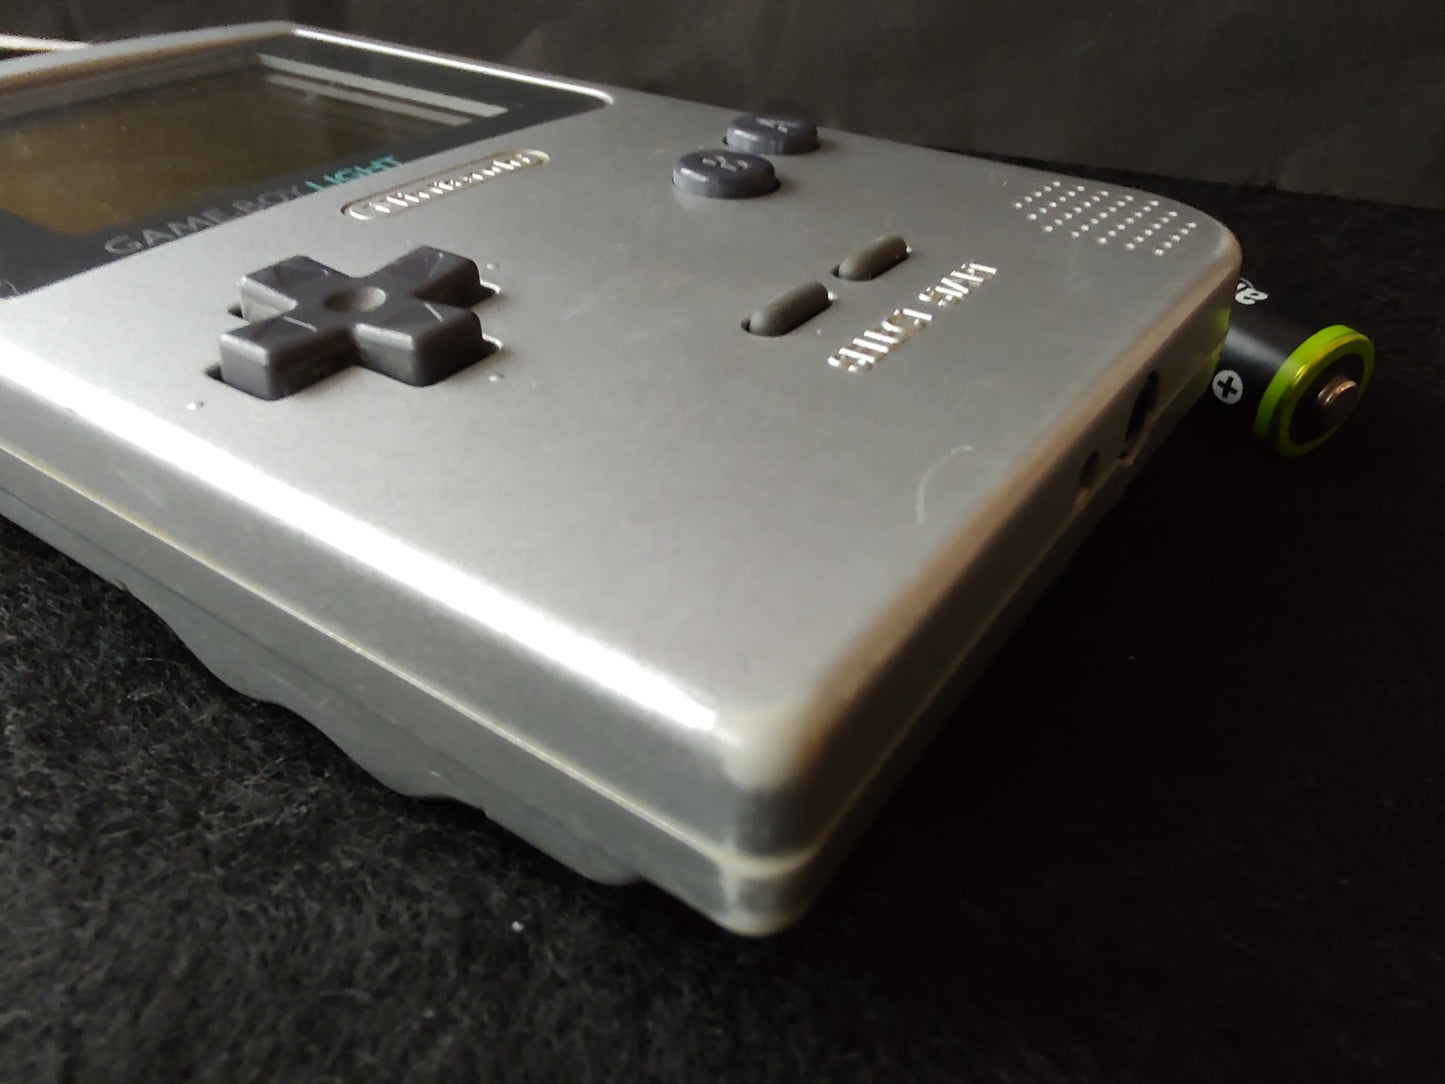 Nintendo Gameboy Light silver color console HGB-101 and Game set, working-g0106-